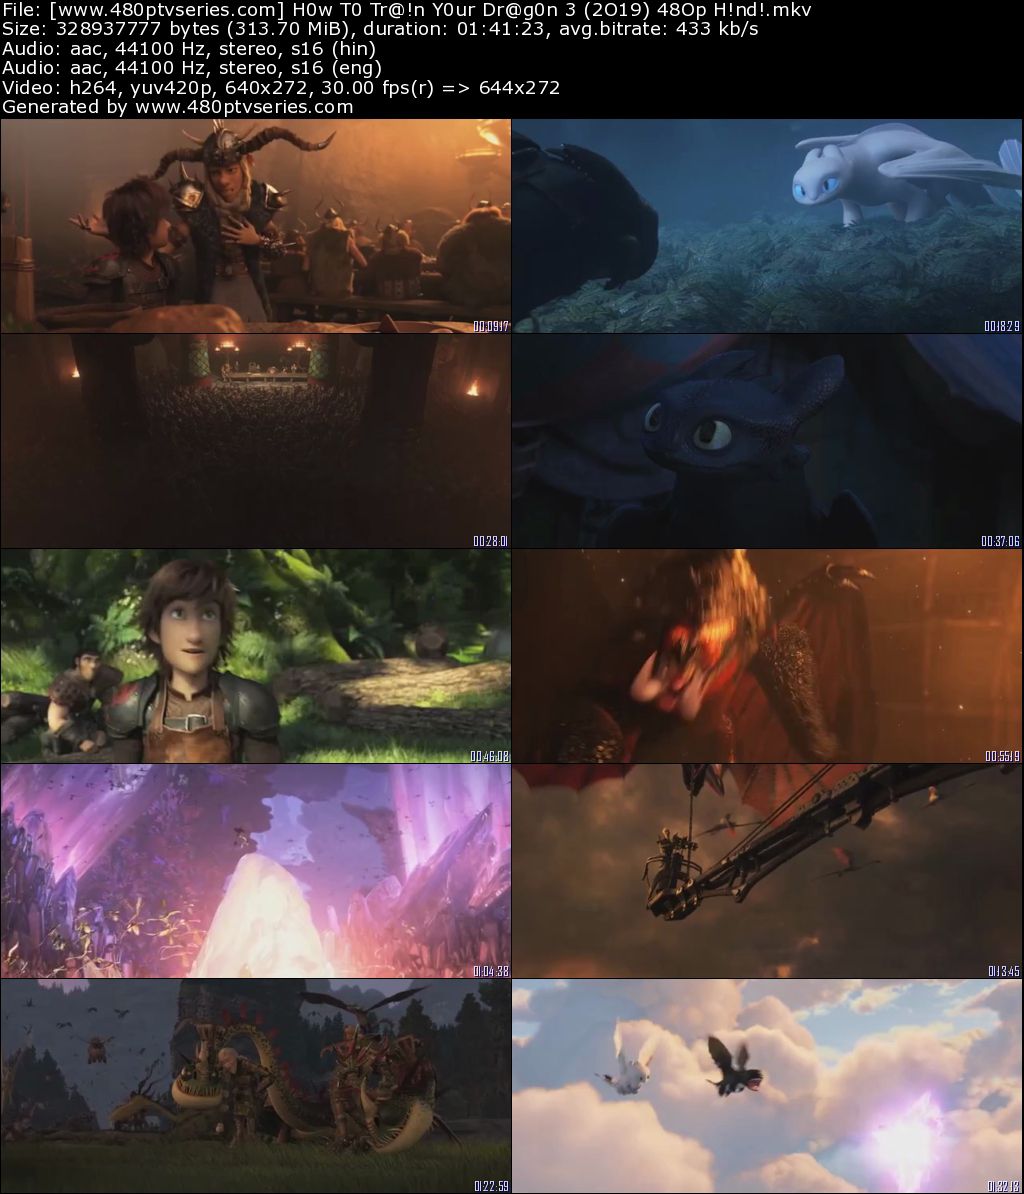 Watch Online Free How to Train Your Dragon 3 The Hidden World (2019) Full Hindi Dual Audio Movie Download 720p 480p HD